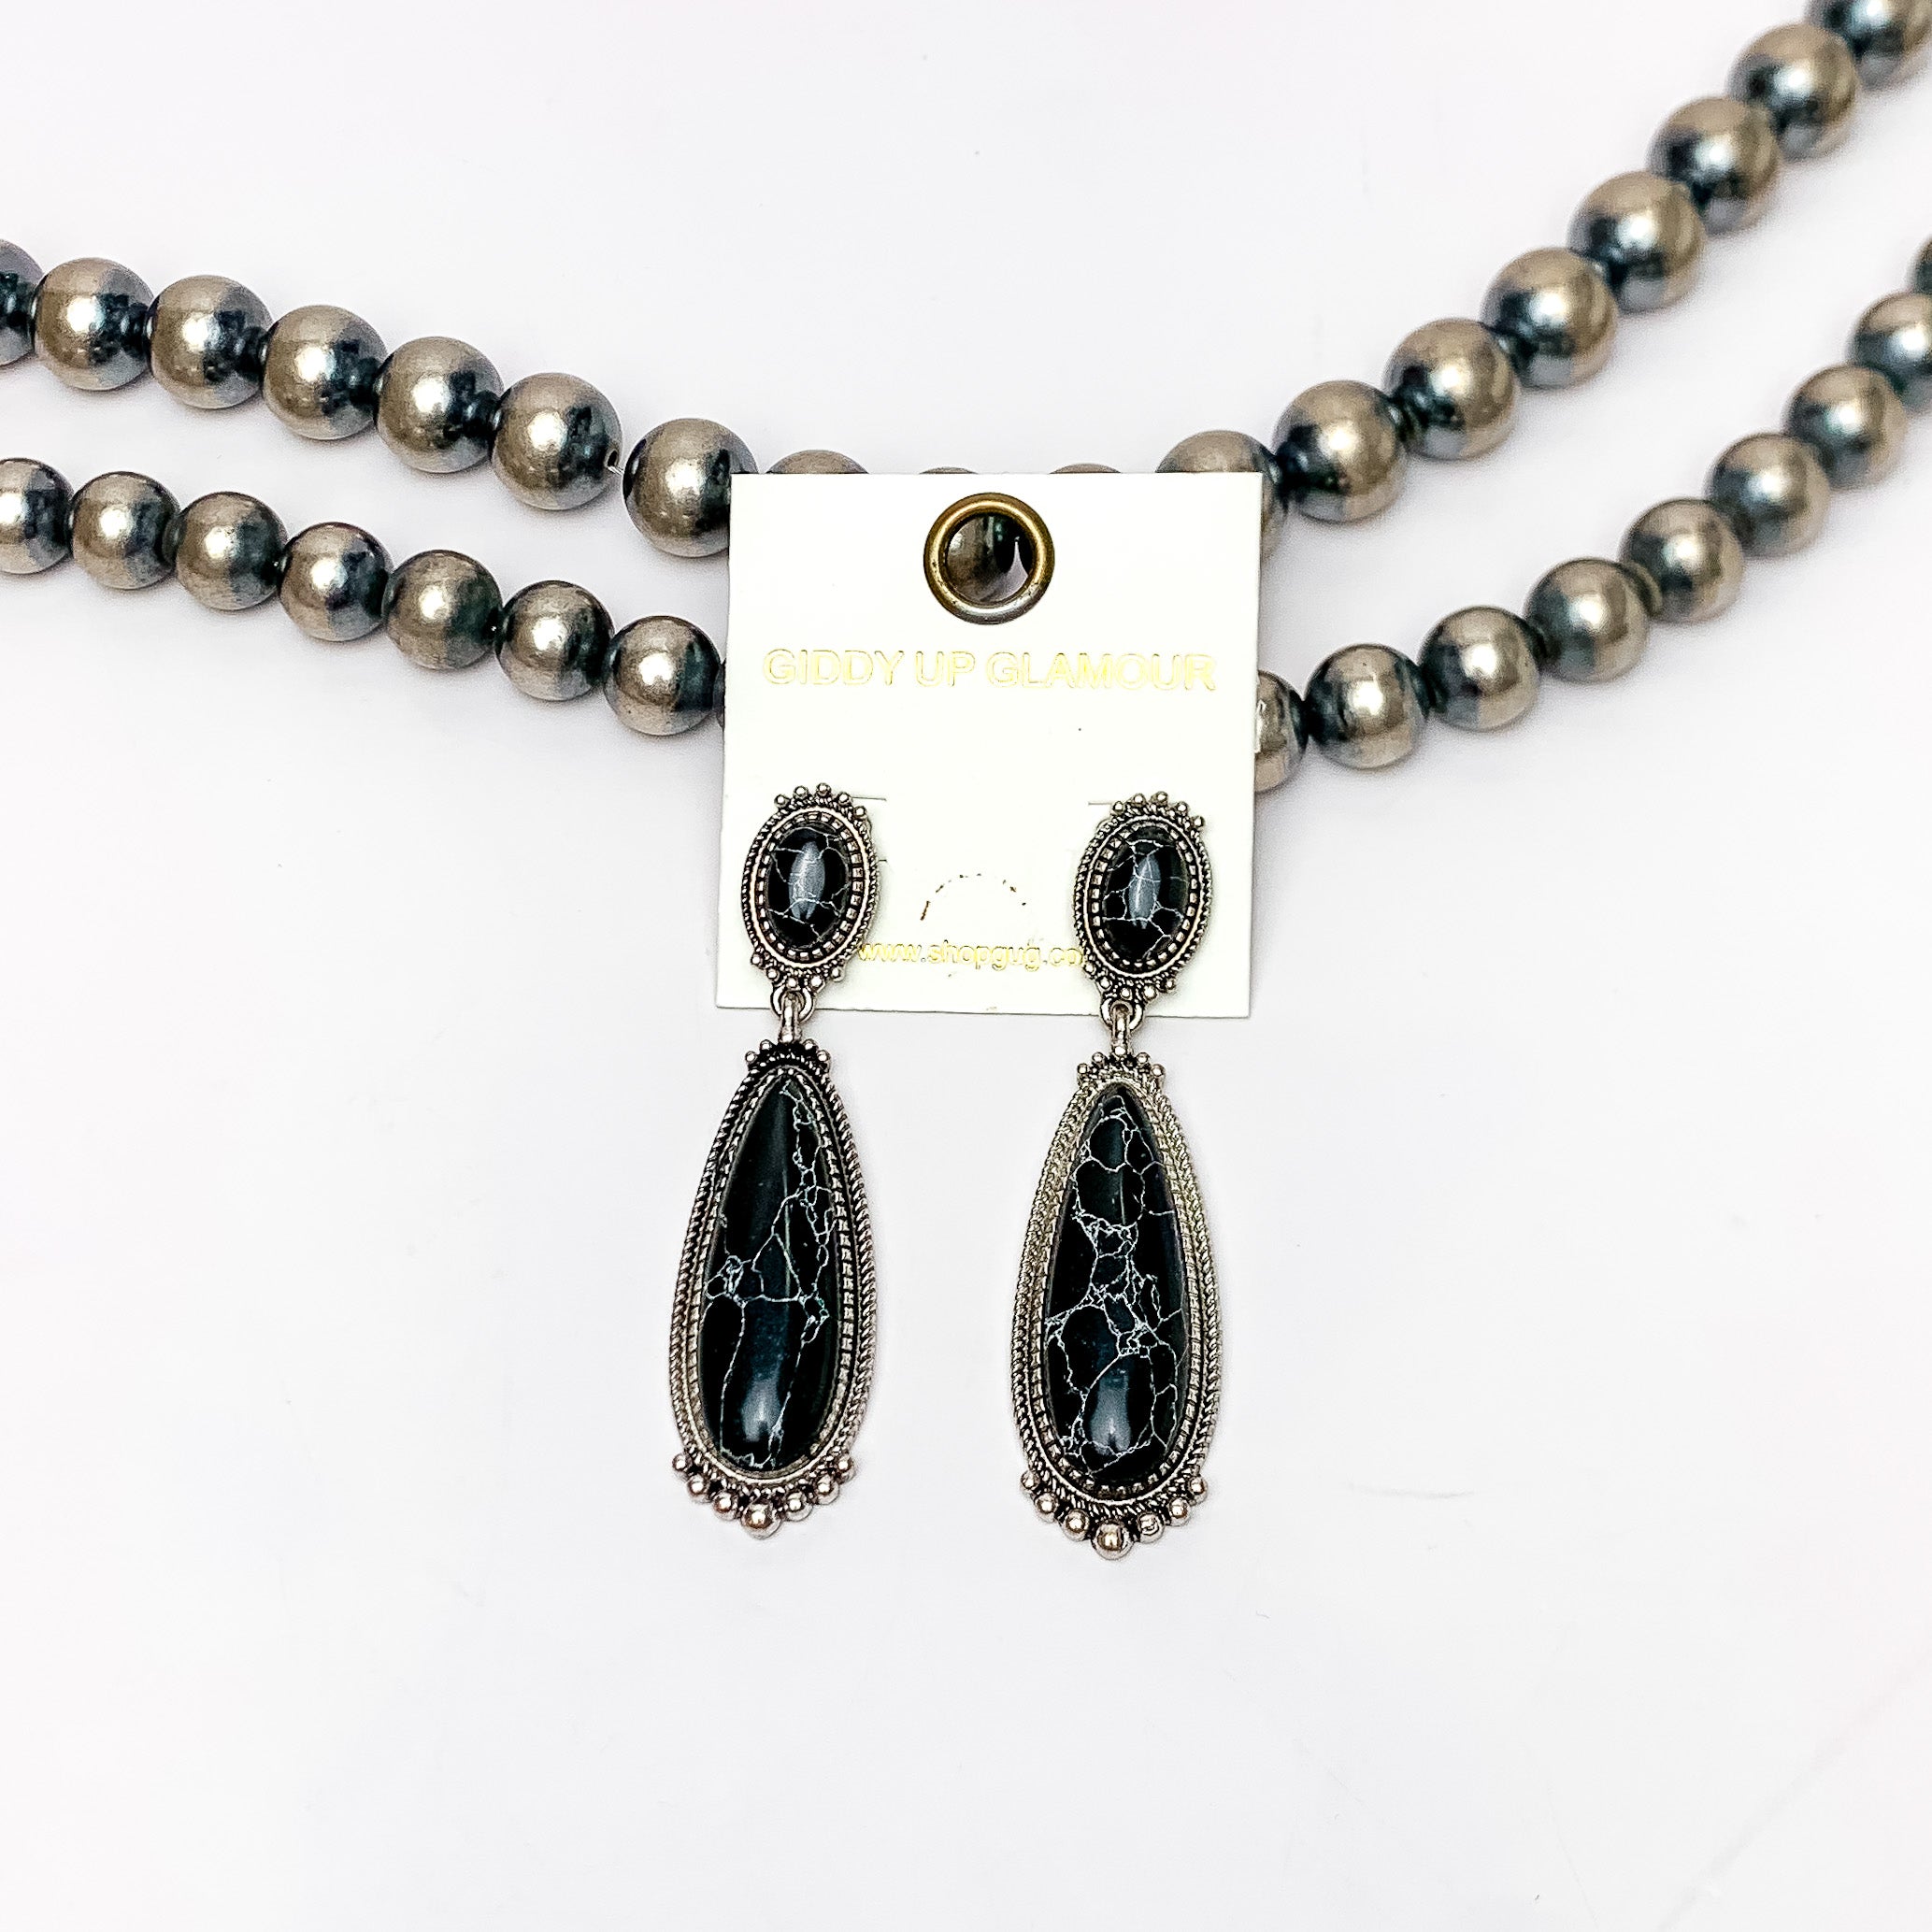 Southern Saturdays Silver Tone Drop Earrings in Black. These earrings featured two large stones. The background of the picture is white and the earrings are laying against Navajo pearls.